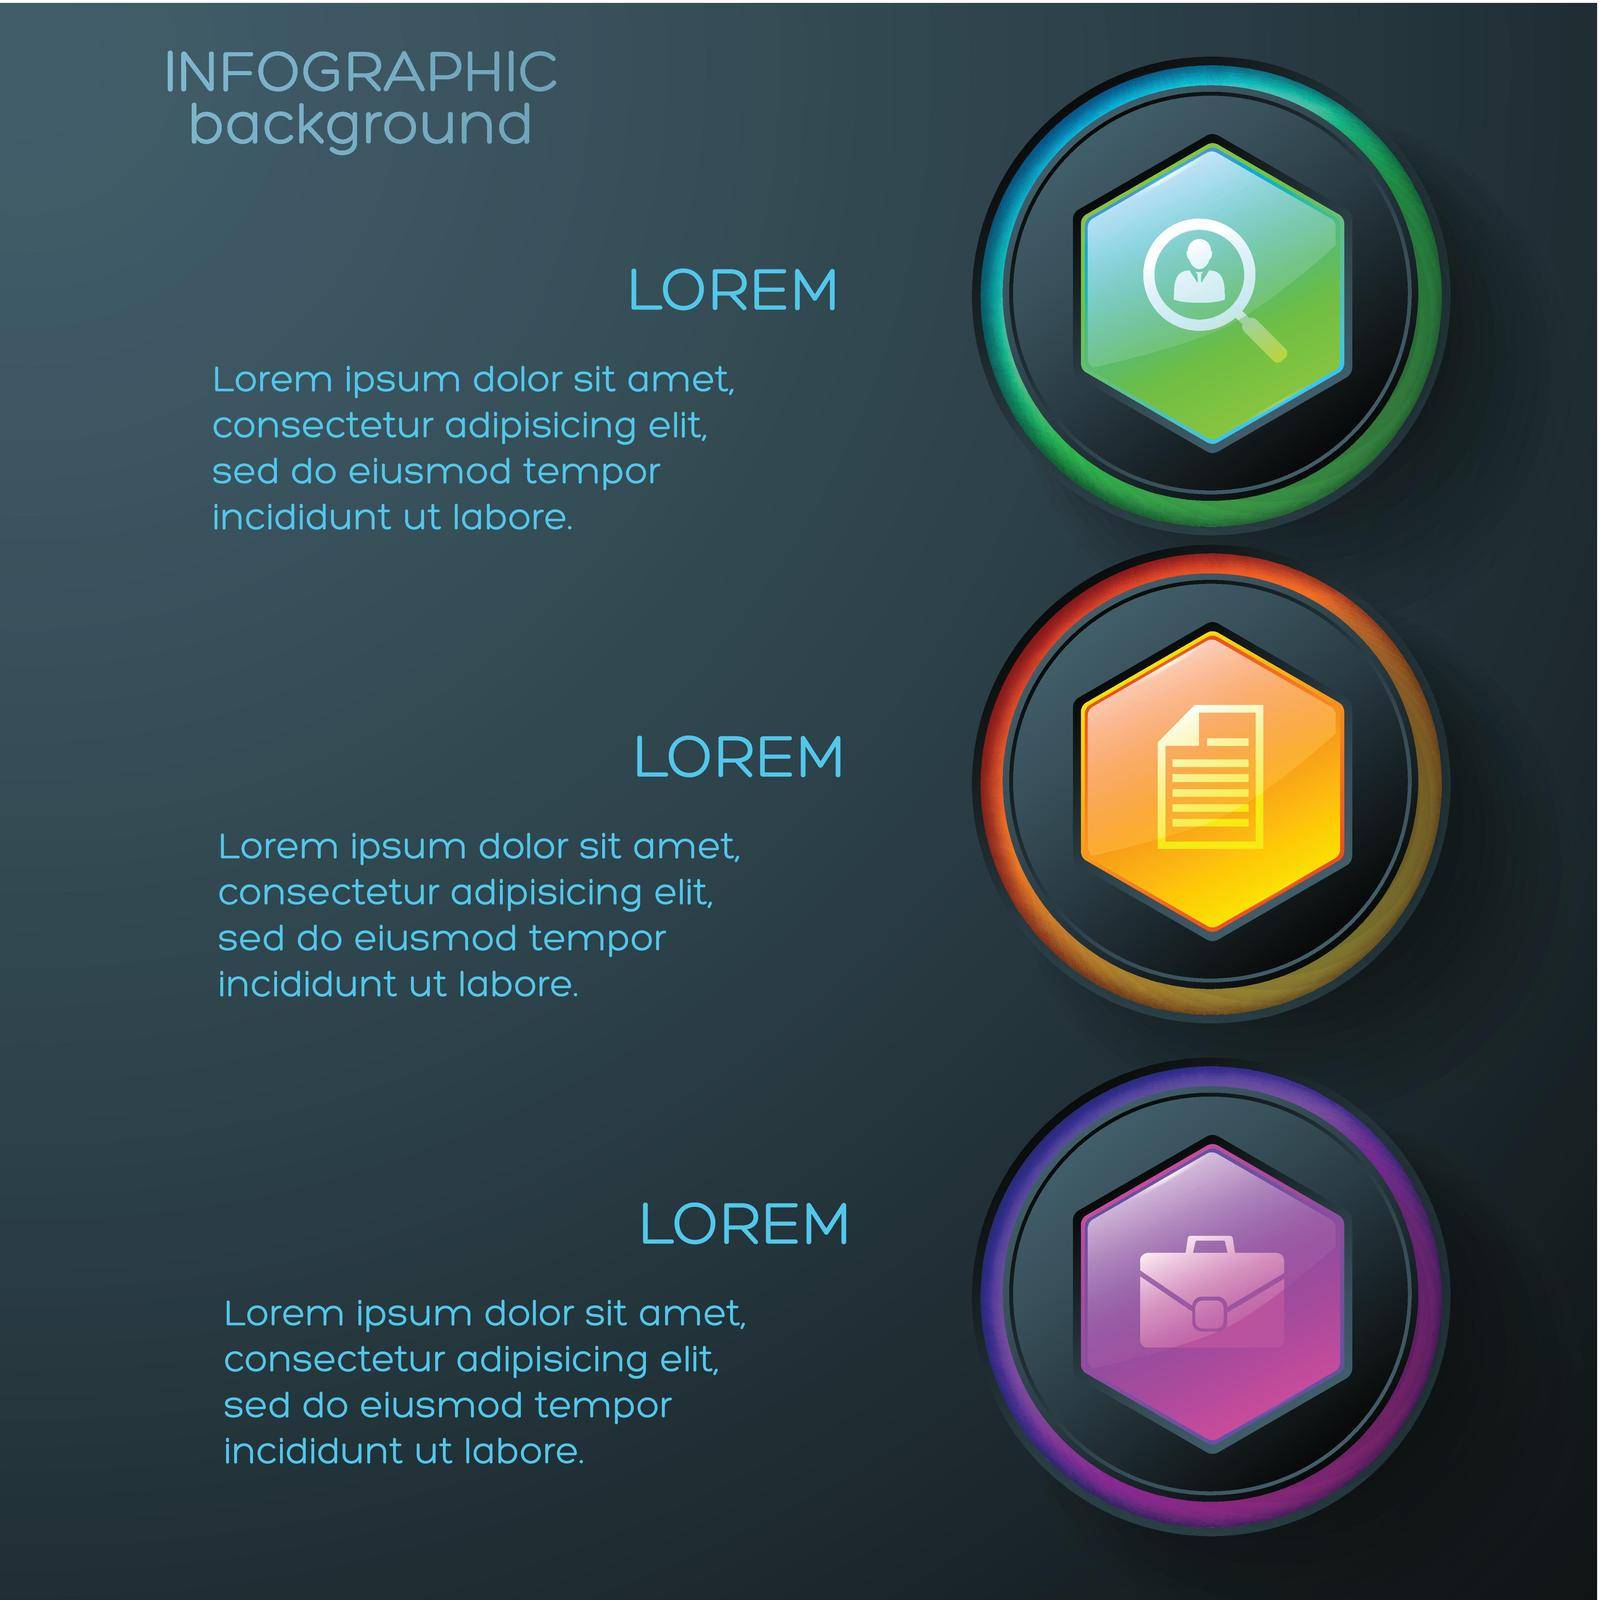 Web abstract infographics with business icons colorful glossy hexagons and rings on dark background vector illustration